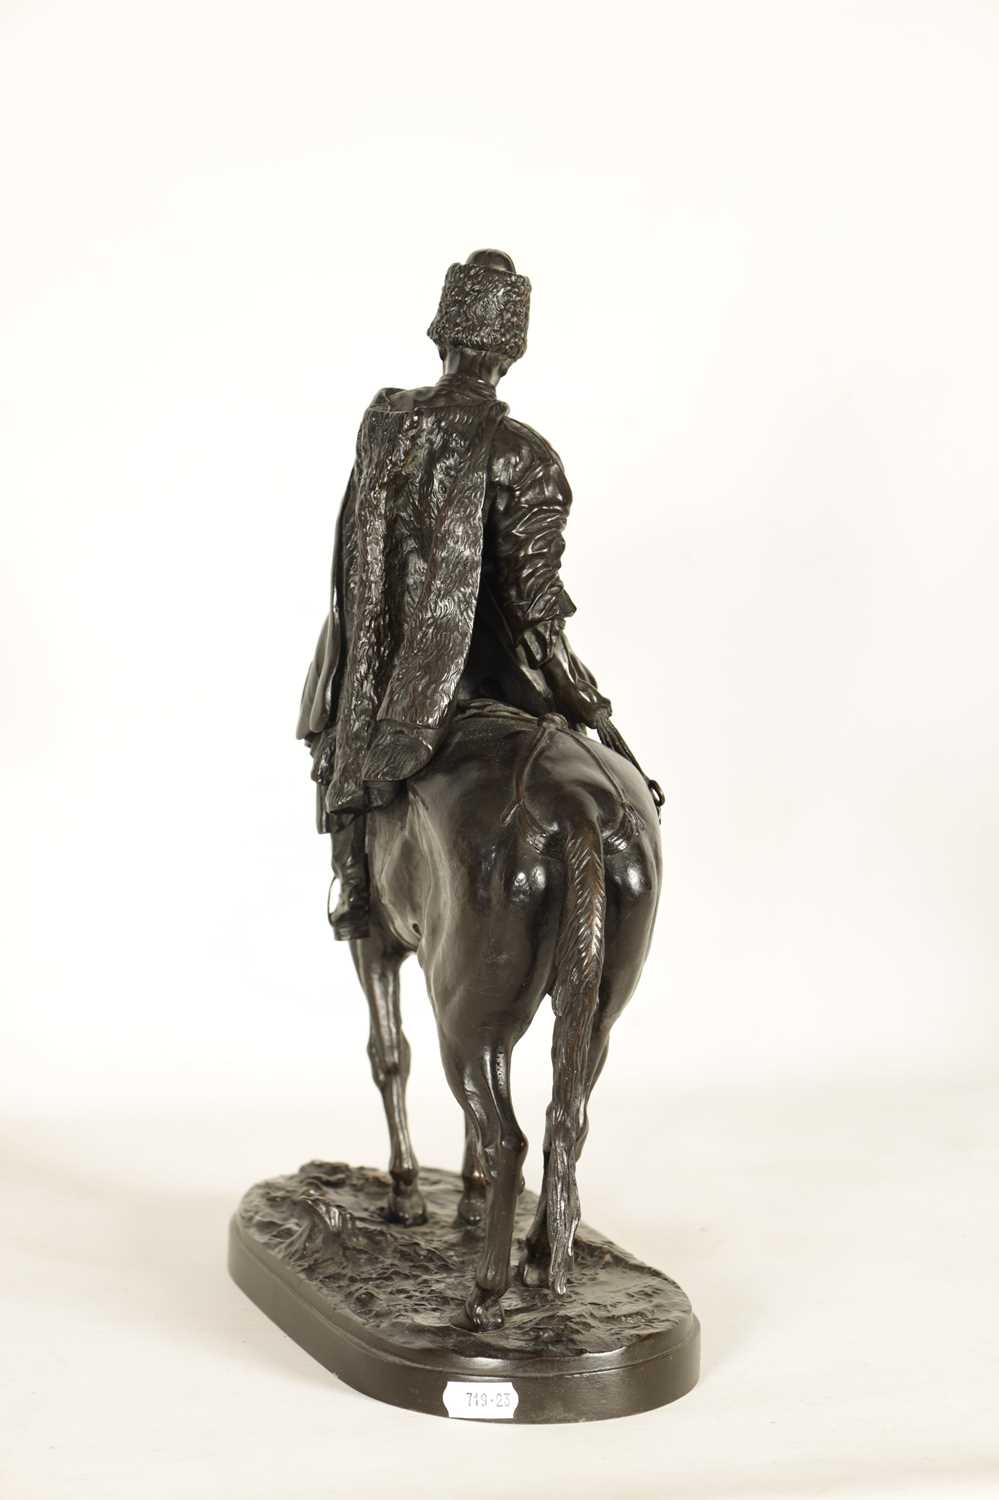 E. NAHCEPE. A LATE 19TH CENTURY RUSSIAN PATINATED BRONZE SCULPTURE - Image 10 of 21